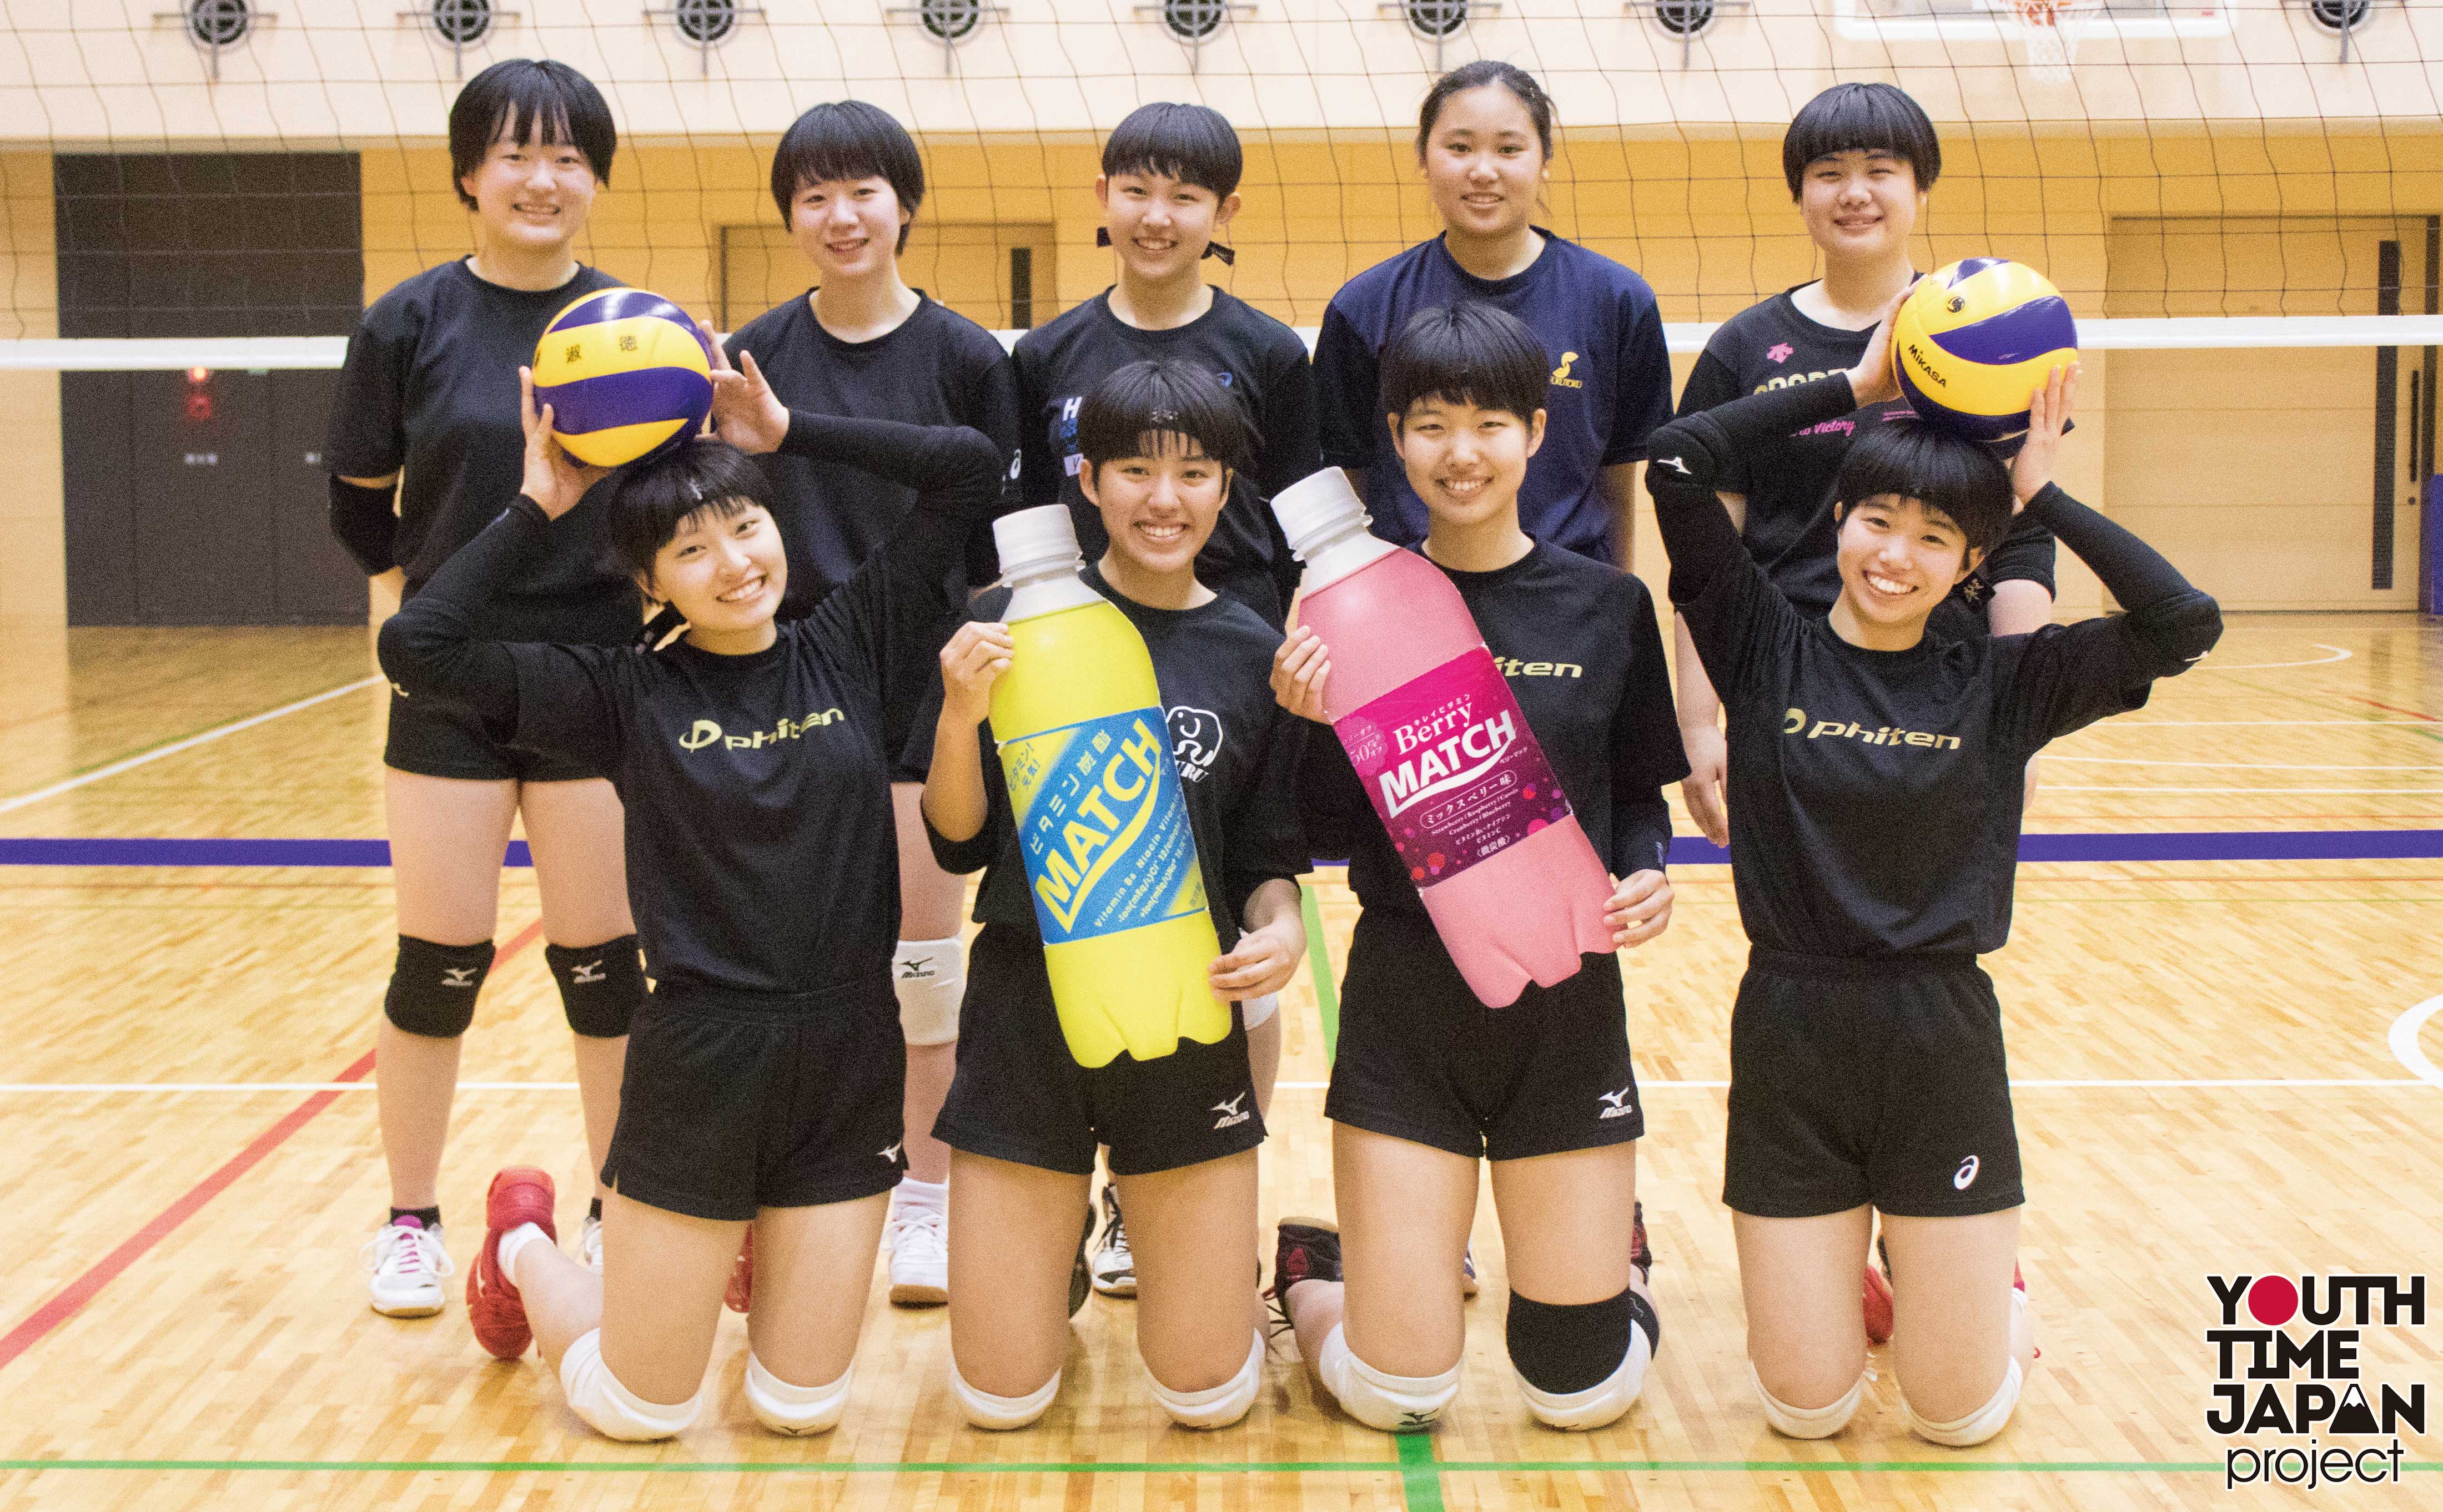 Bukatsu魂 Supported By Match Season8 淑徳高等学校 東京都 女子バレー部 Youth Time Japan Project Web